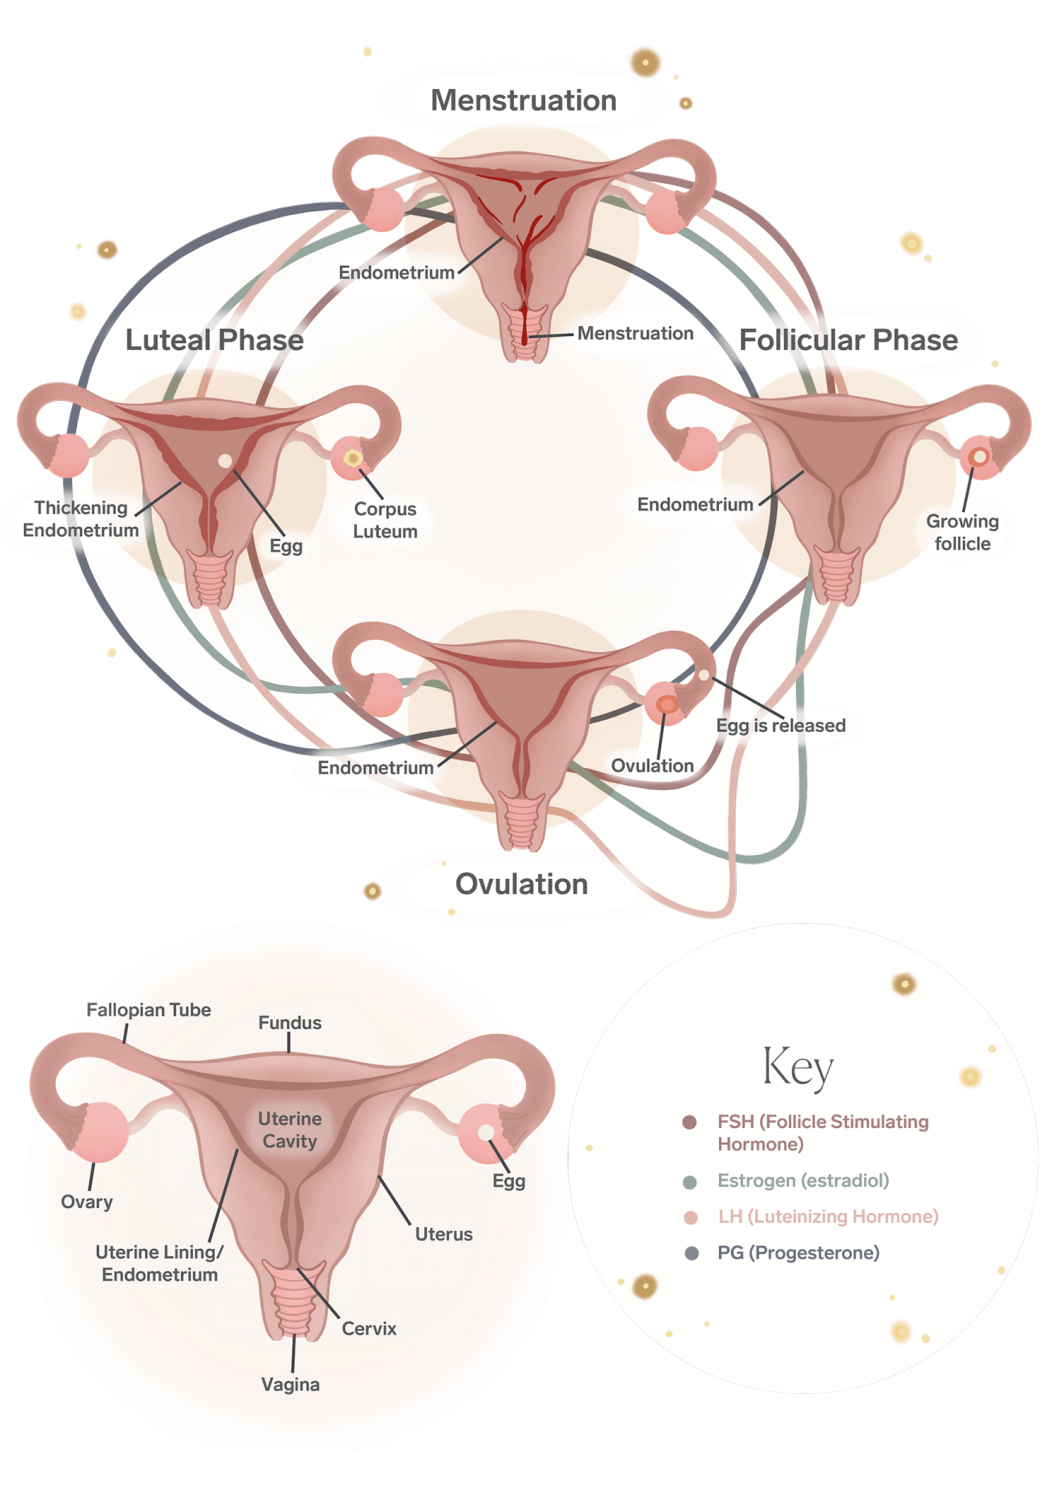 The menstrual cycle has 2 phases, namely, follicular phase and the